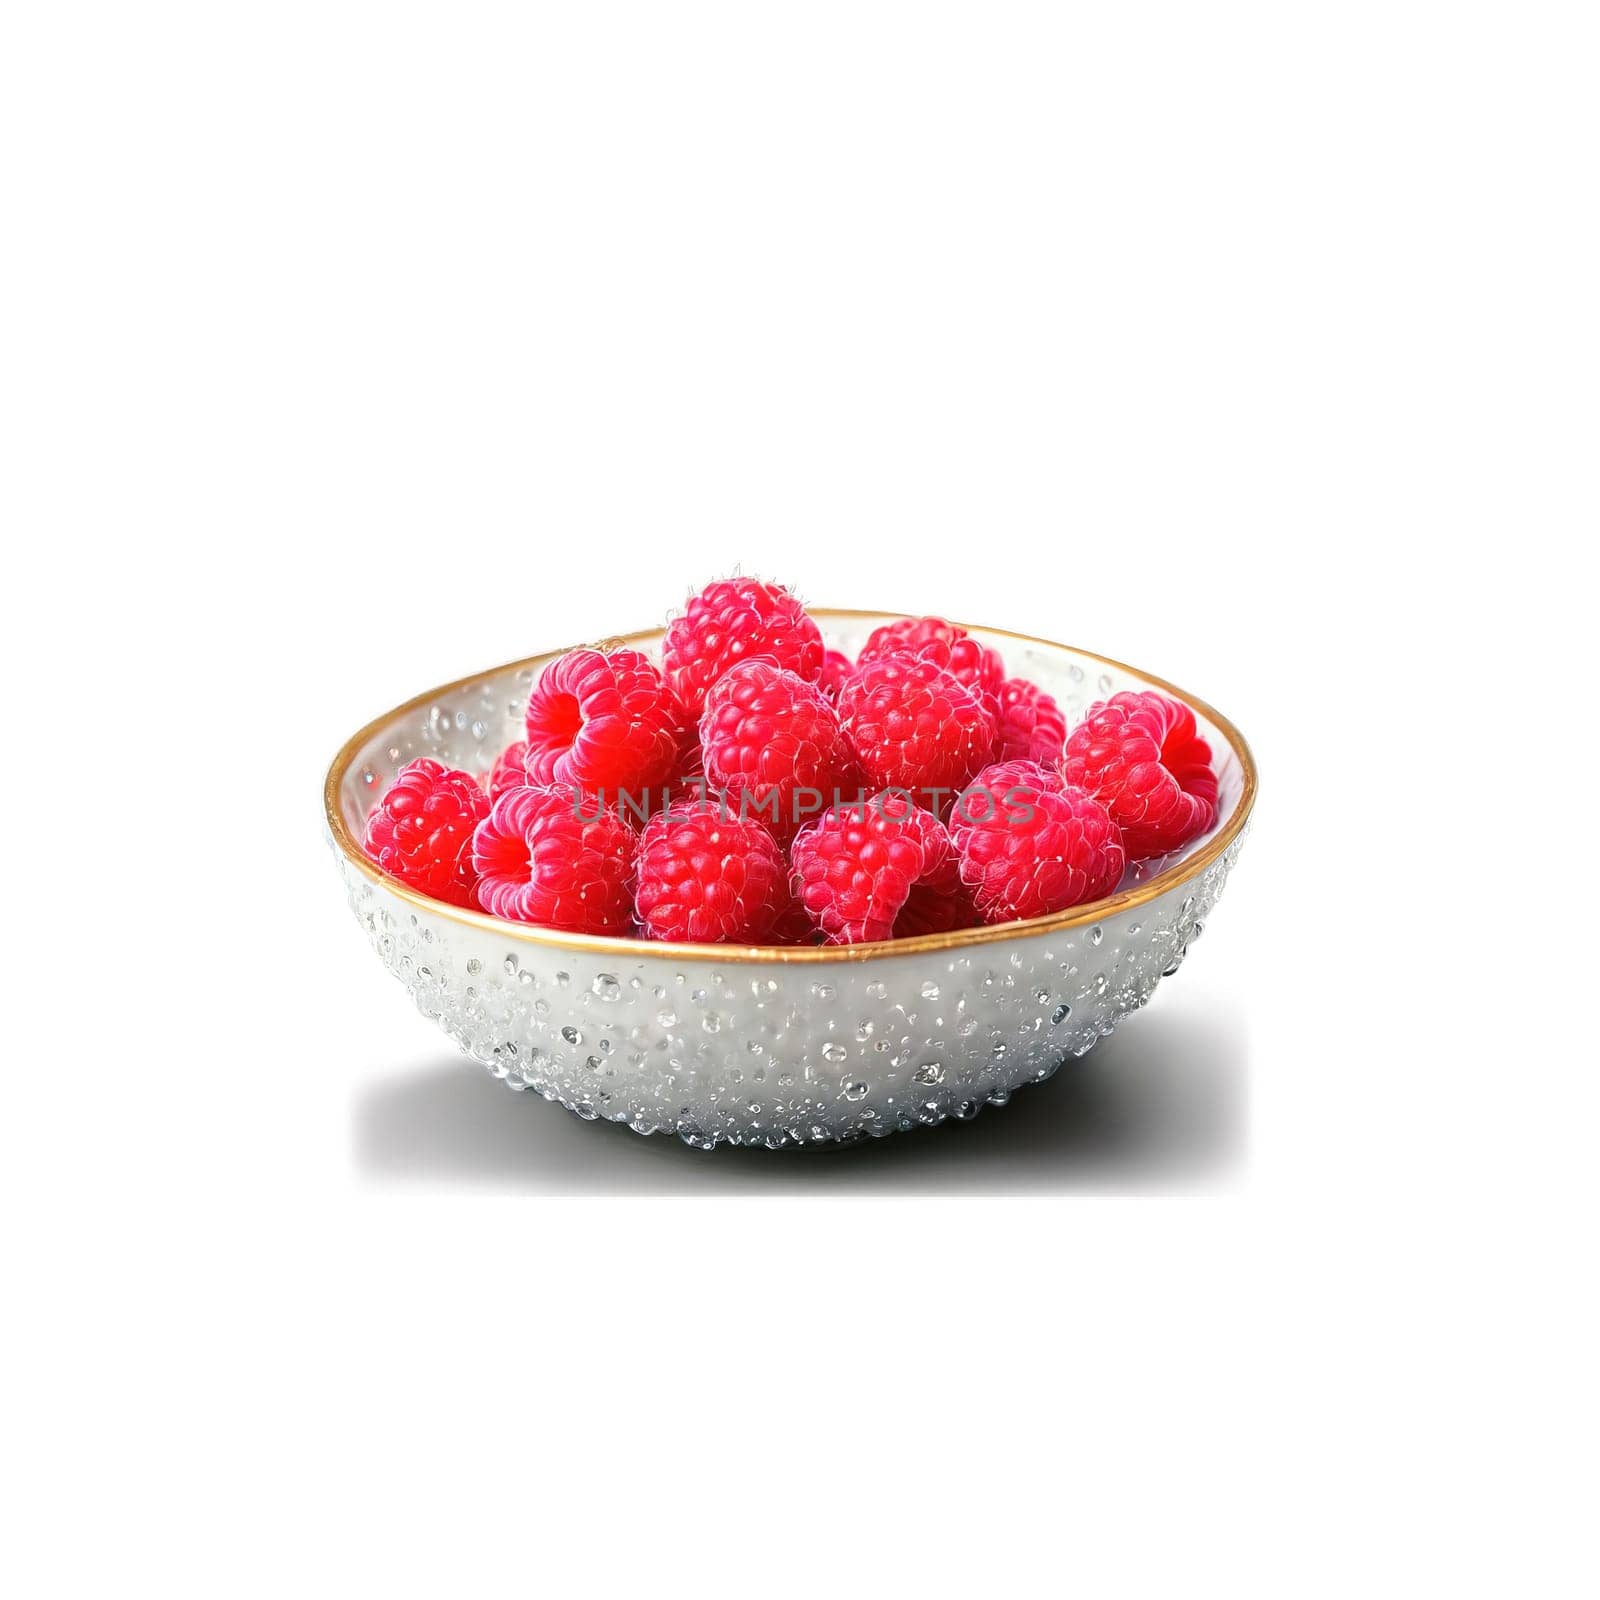 Vibrant raspberries Rubus idaeus nestled in a delicate ceramic bowl showcasing their alluring texture Refreshing by panophotograph